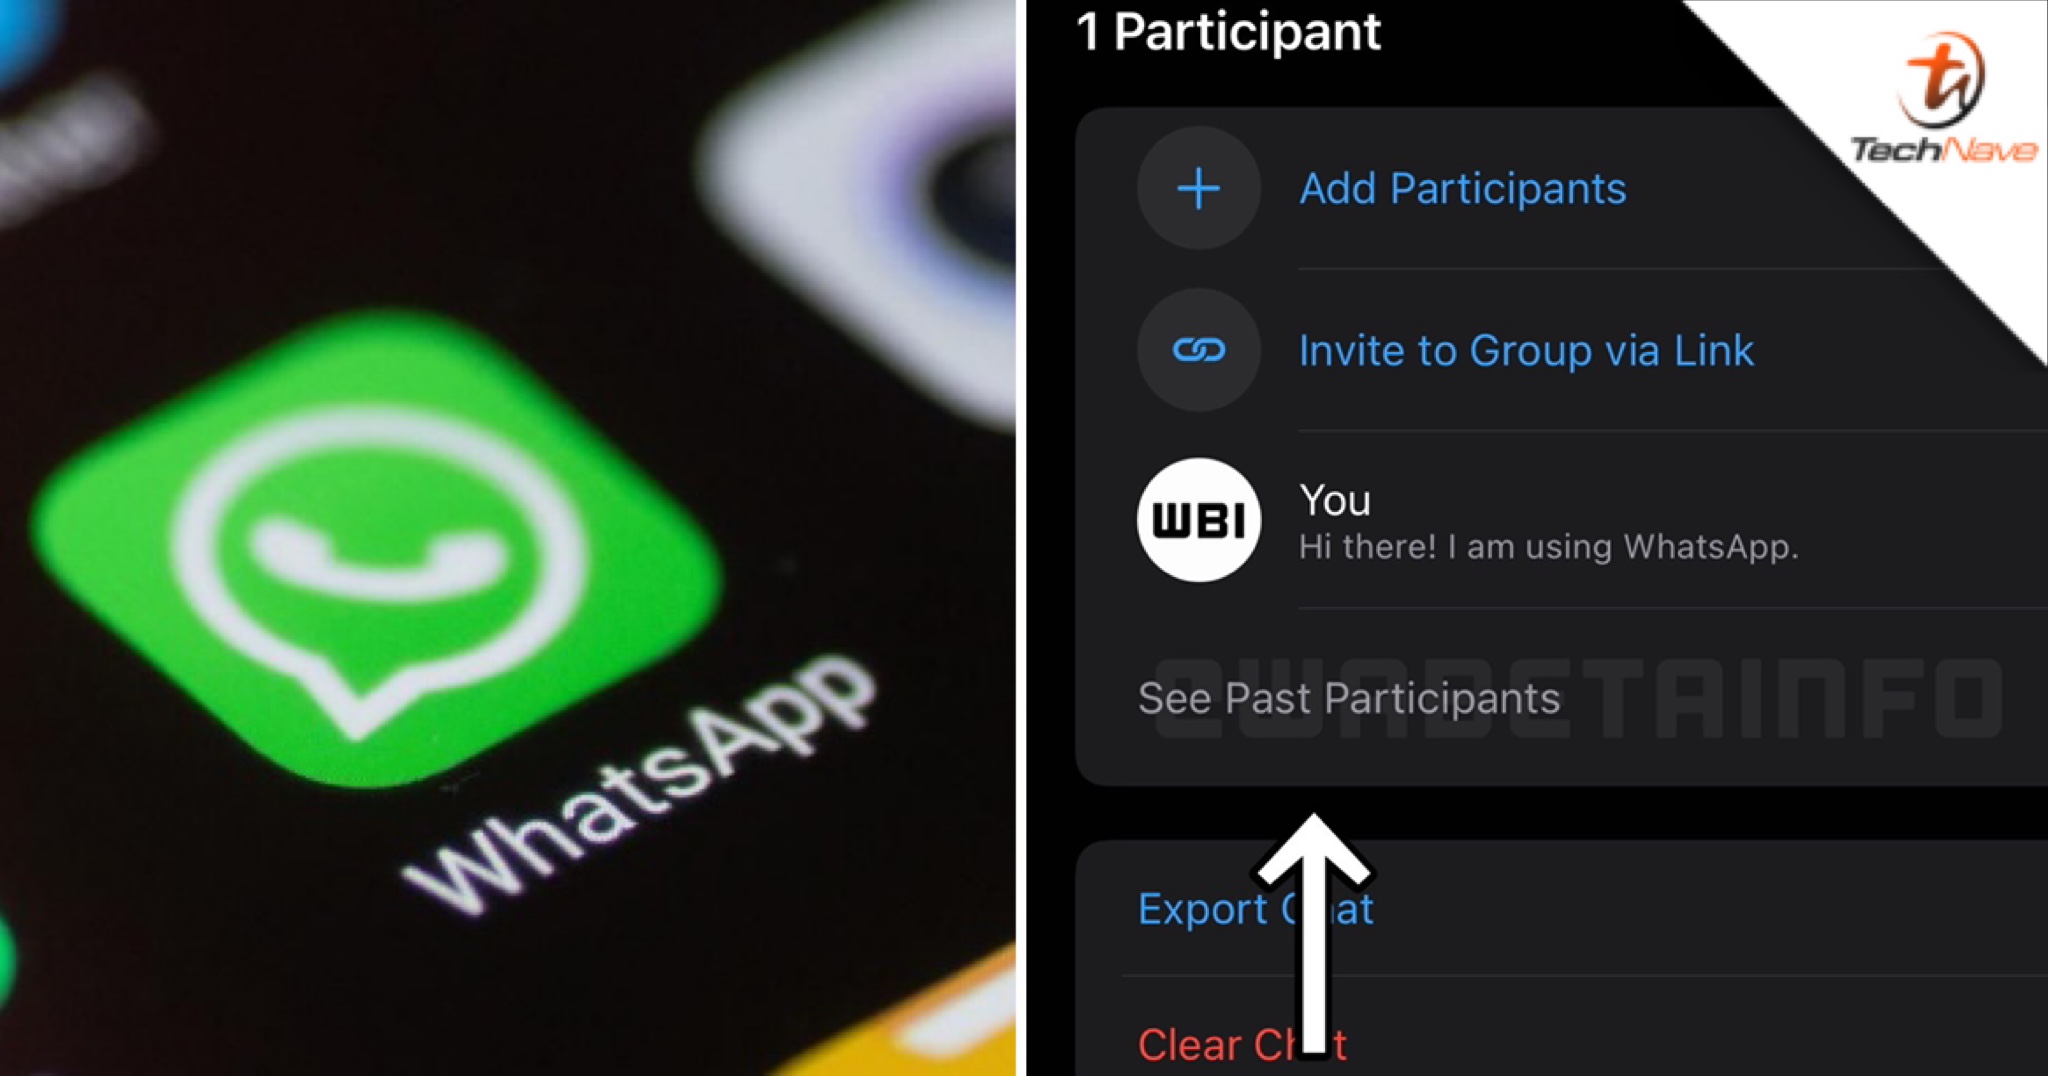 WhatsApp may soon let users view past participants of their group chats